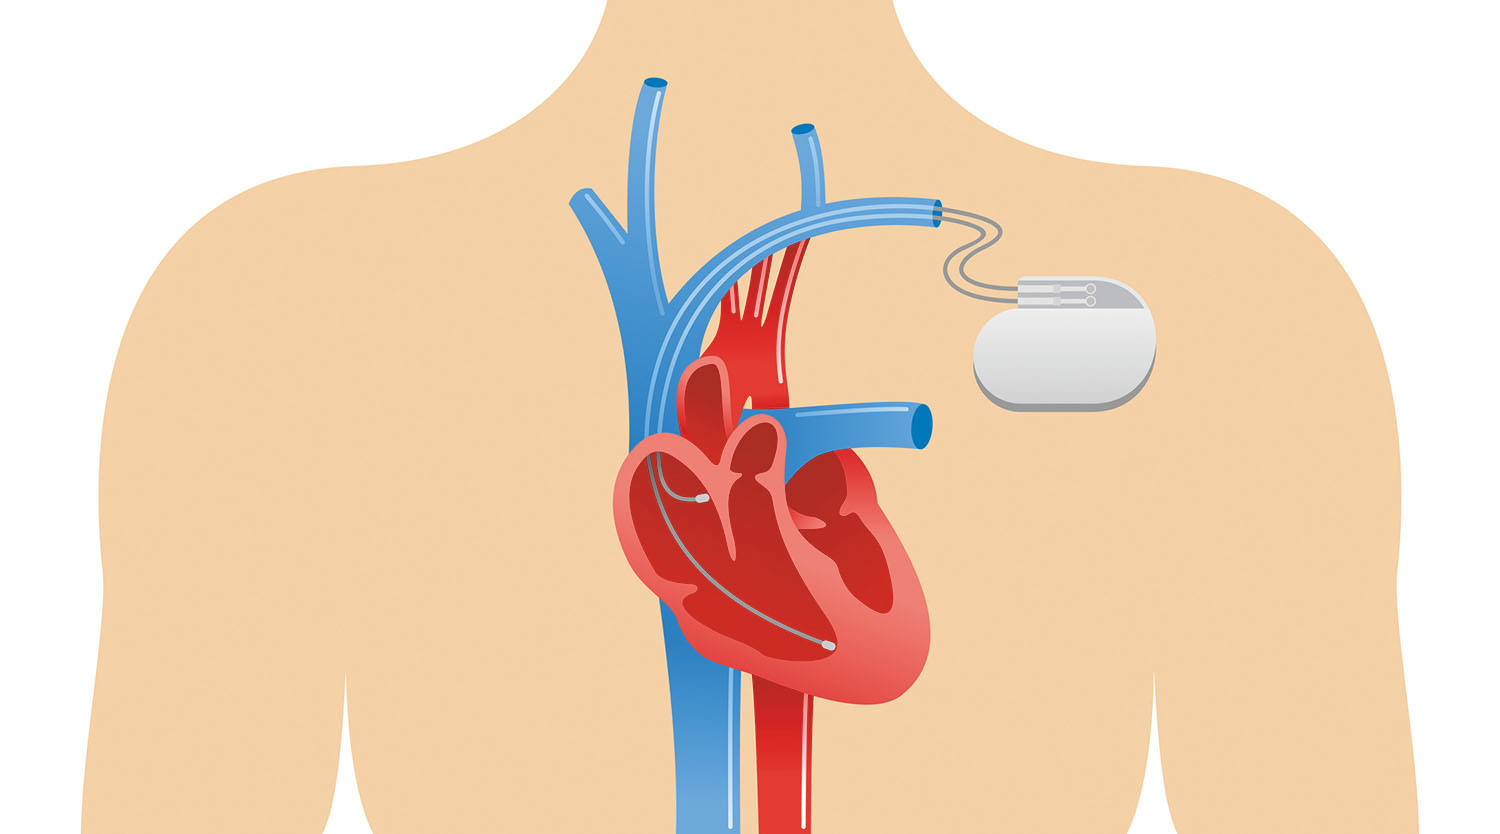 illustration showing placement of a pacemaker in a human body and how it is connected to the heart